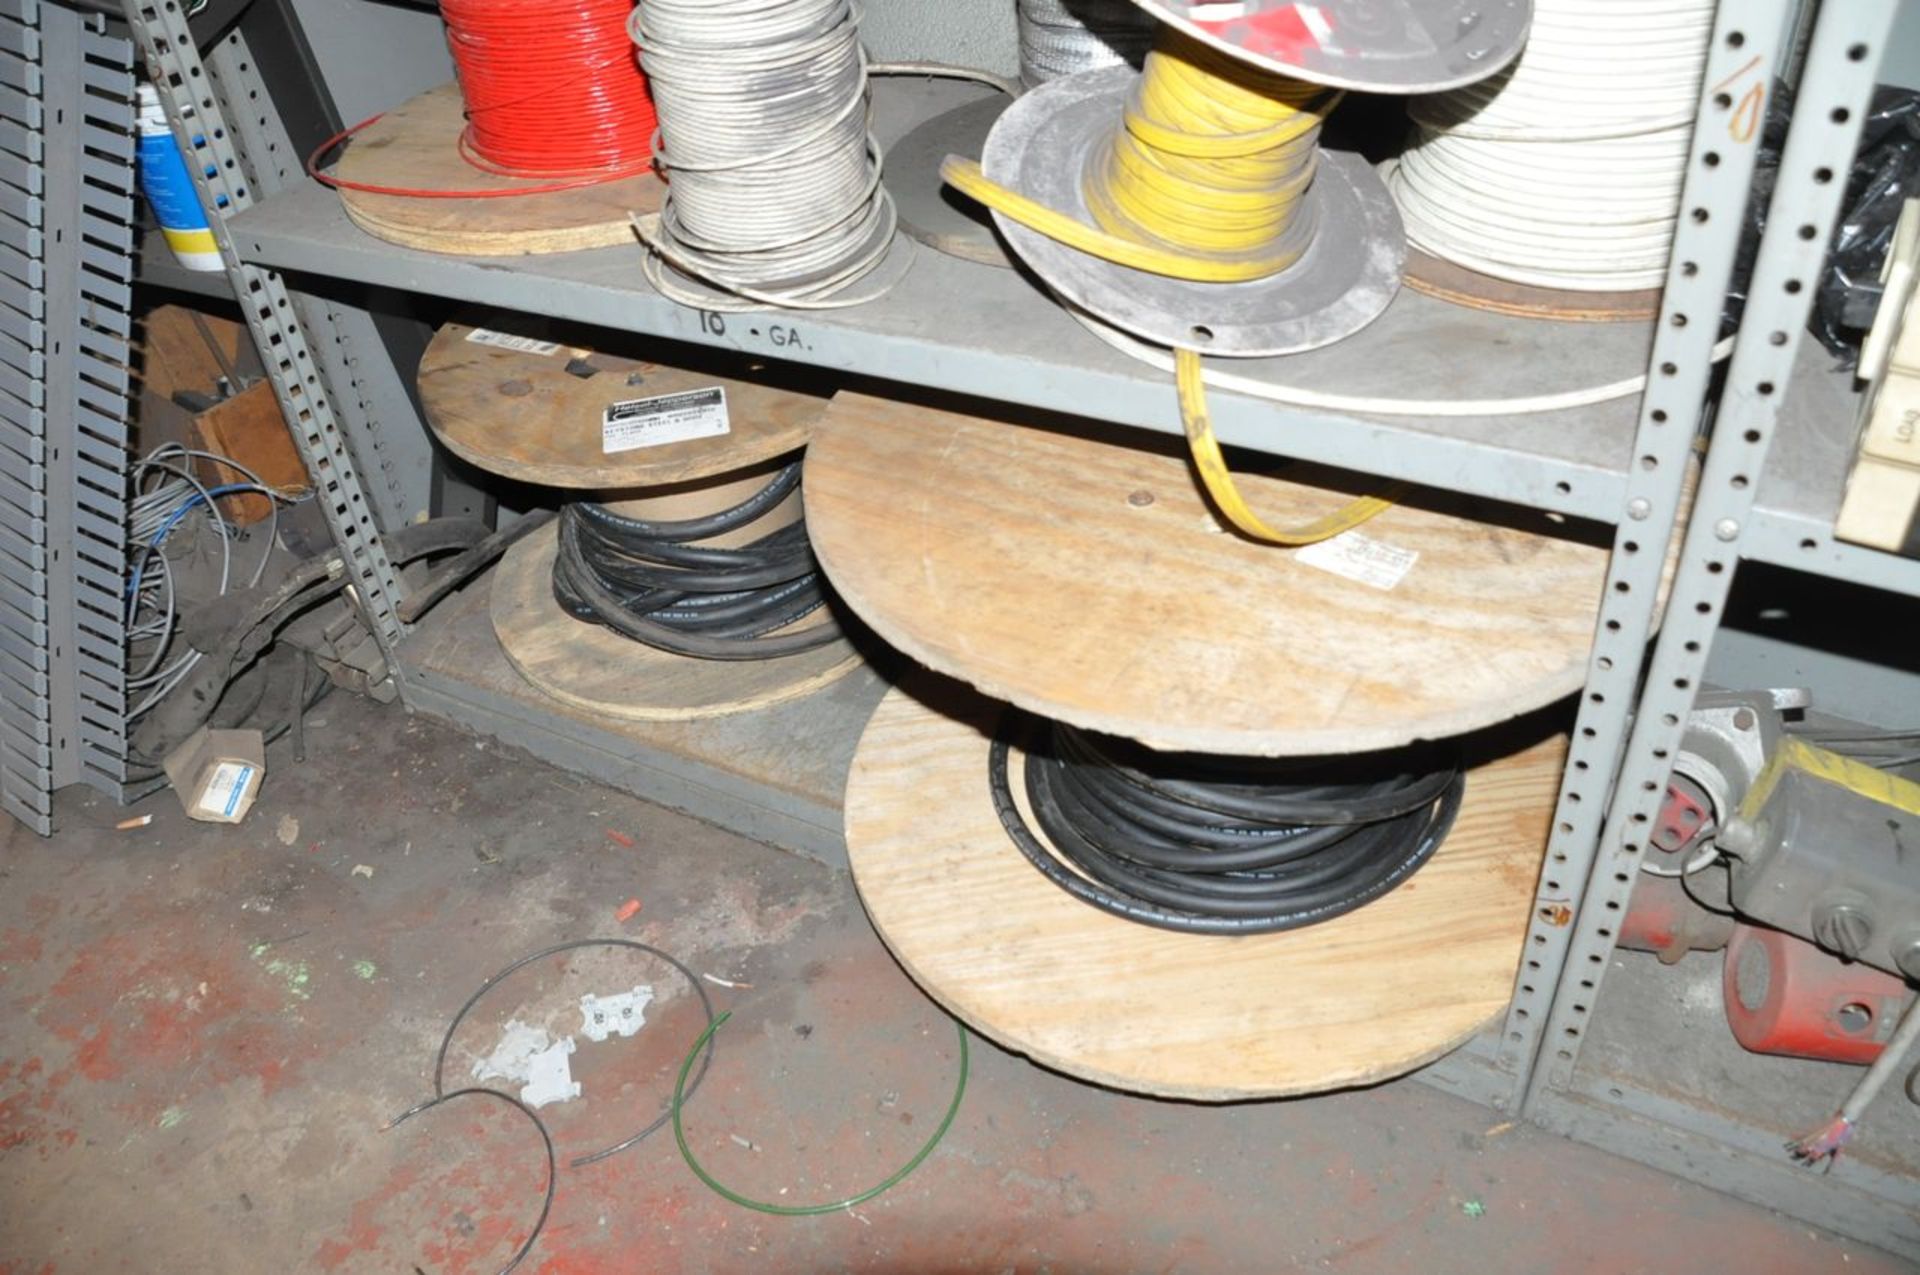 Lot - Electrical Work Boxes, Wire Spools, Various Electrical Components, Shelving, Harnesses and - Image 10 of 13